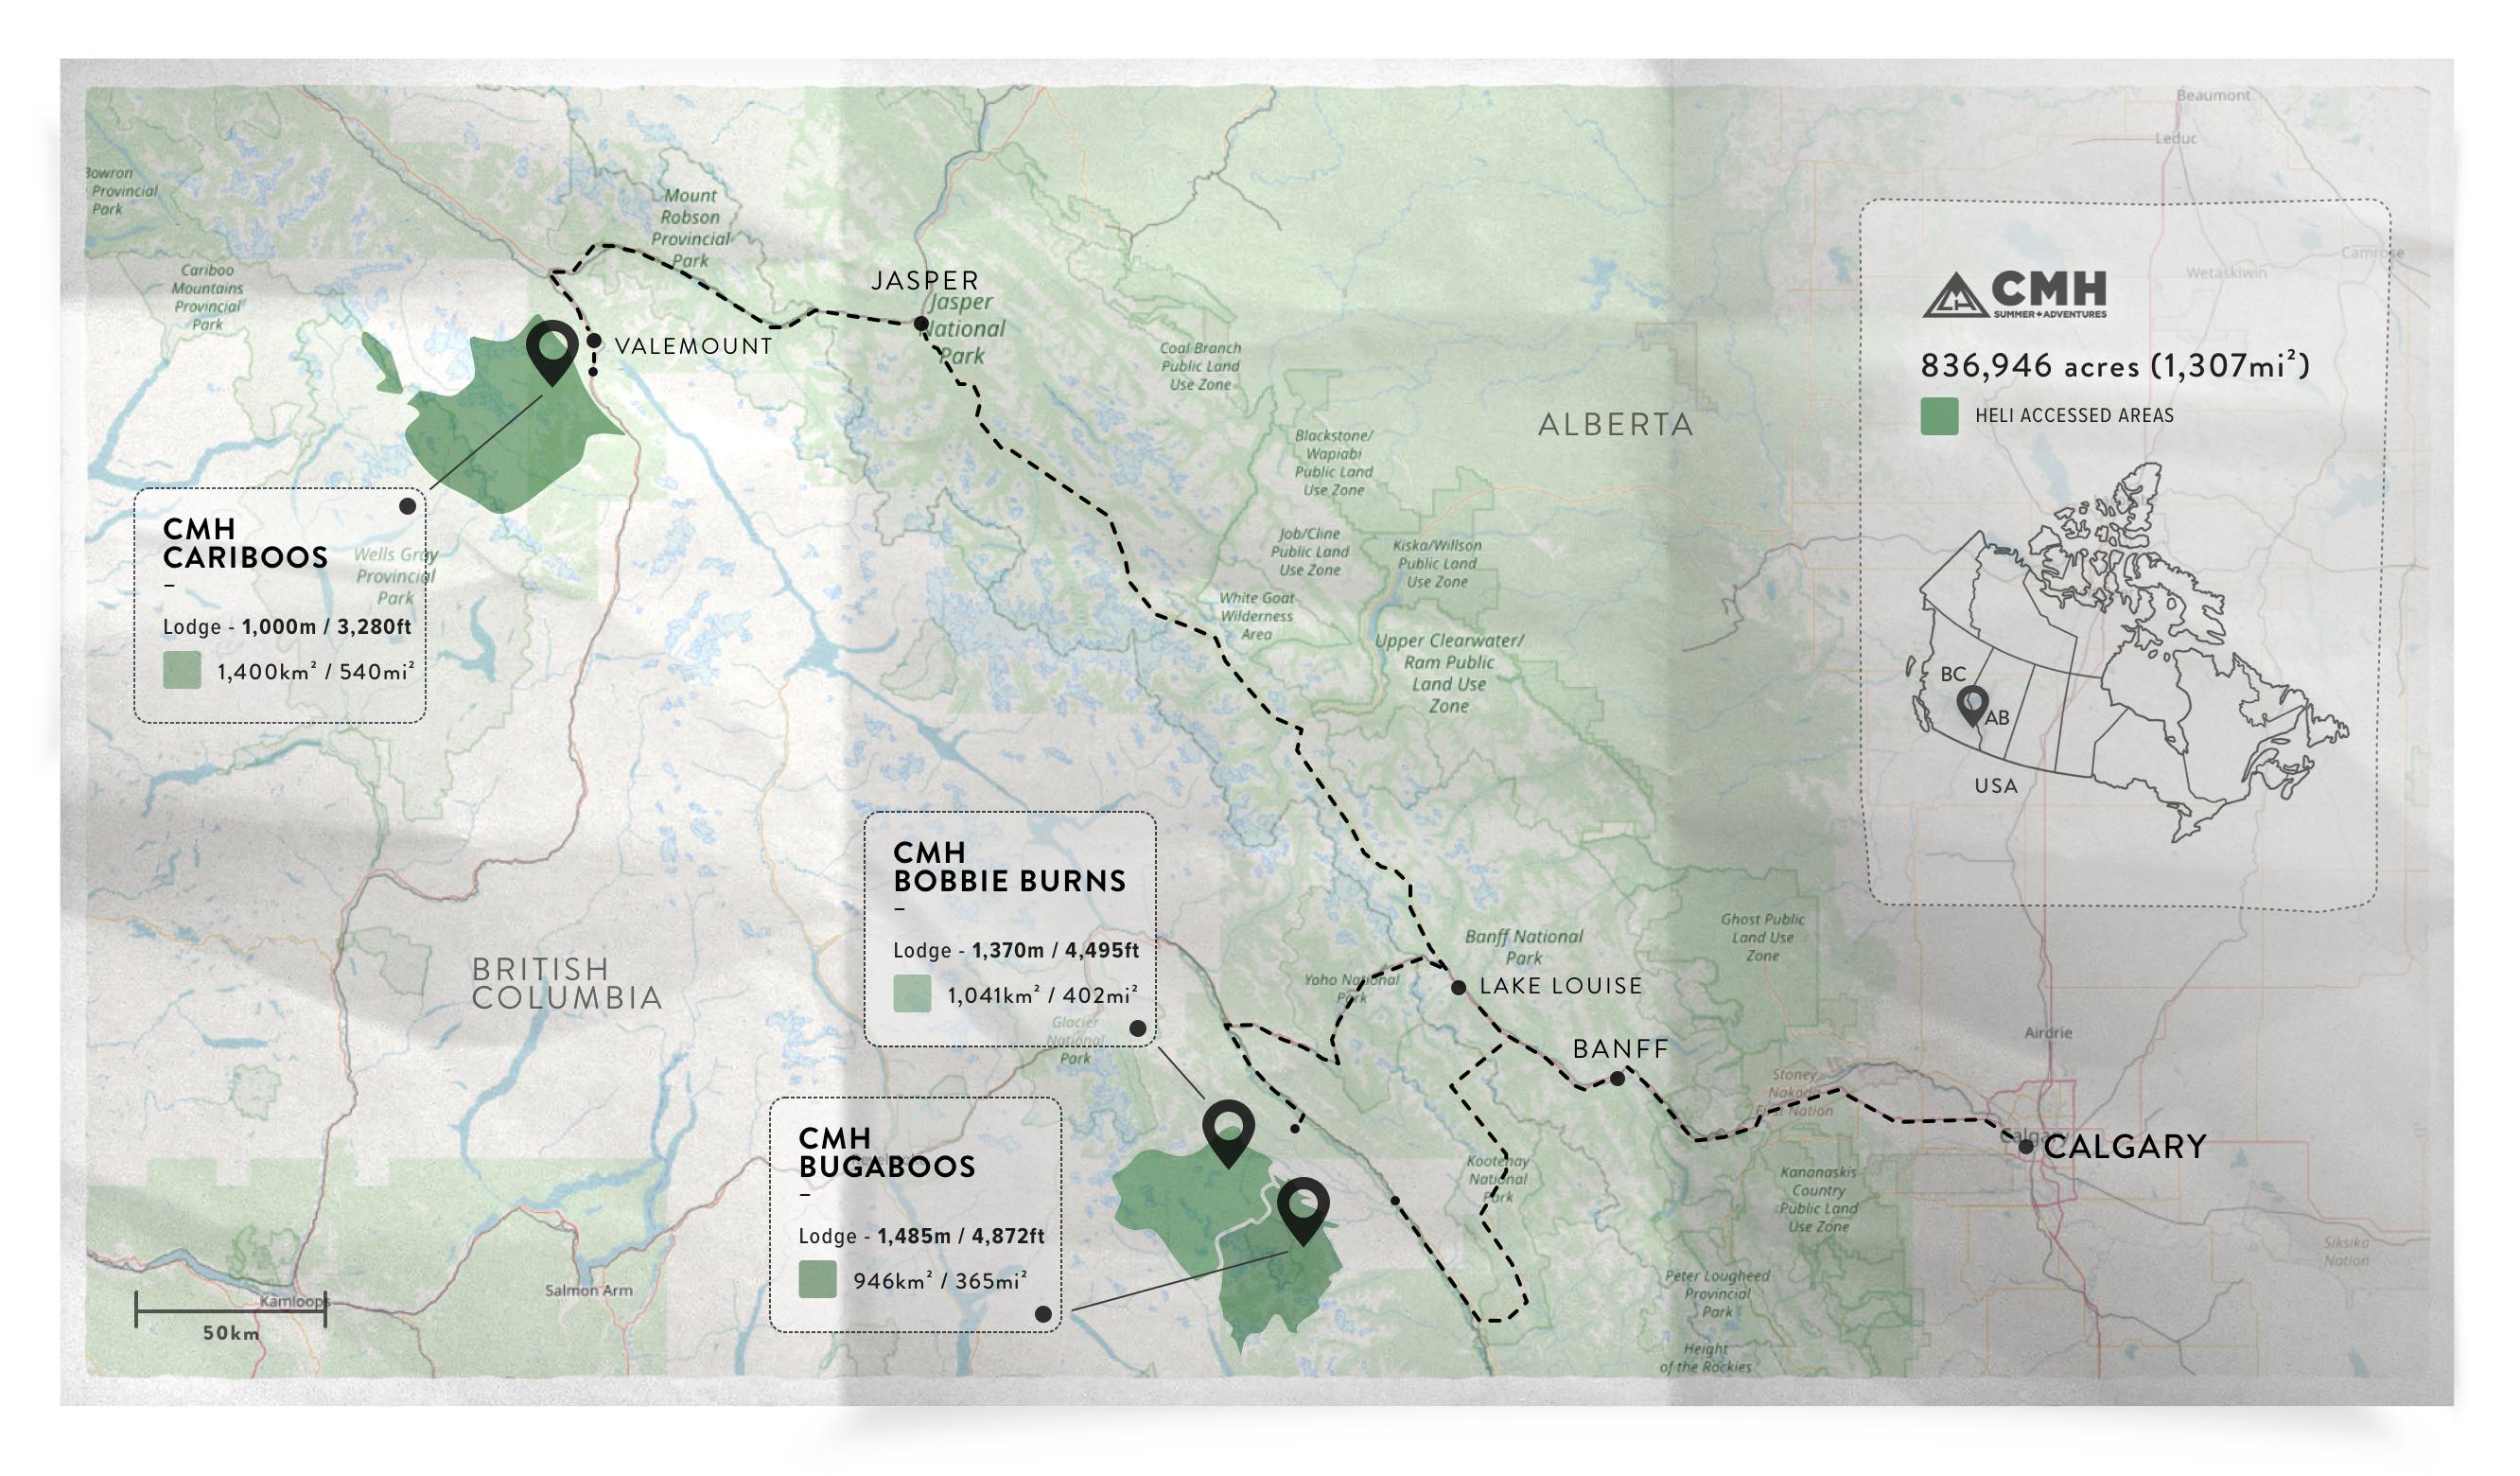 Map showing routes from Calgary to trip locations at Cariboos, Bugaboos, and Bobbie Burns